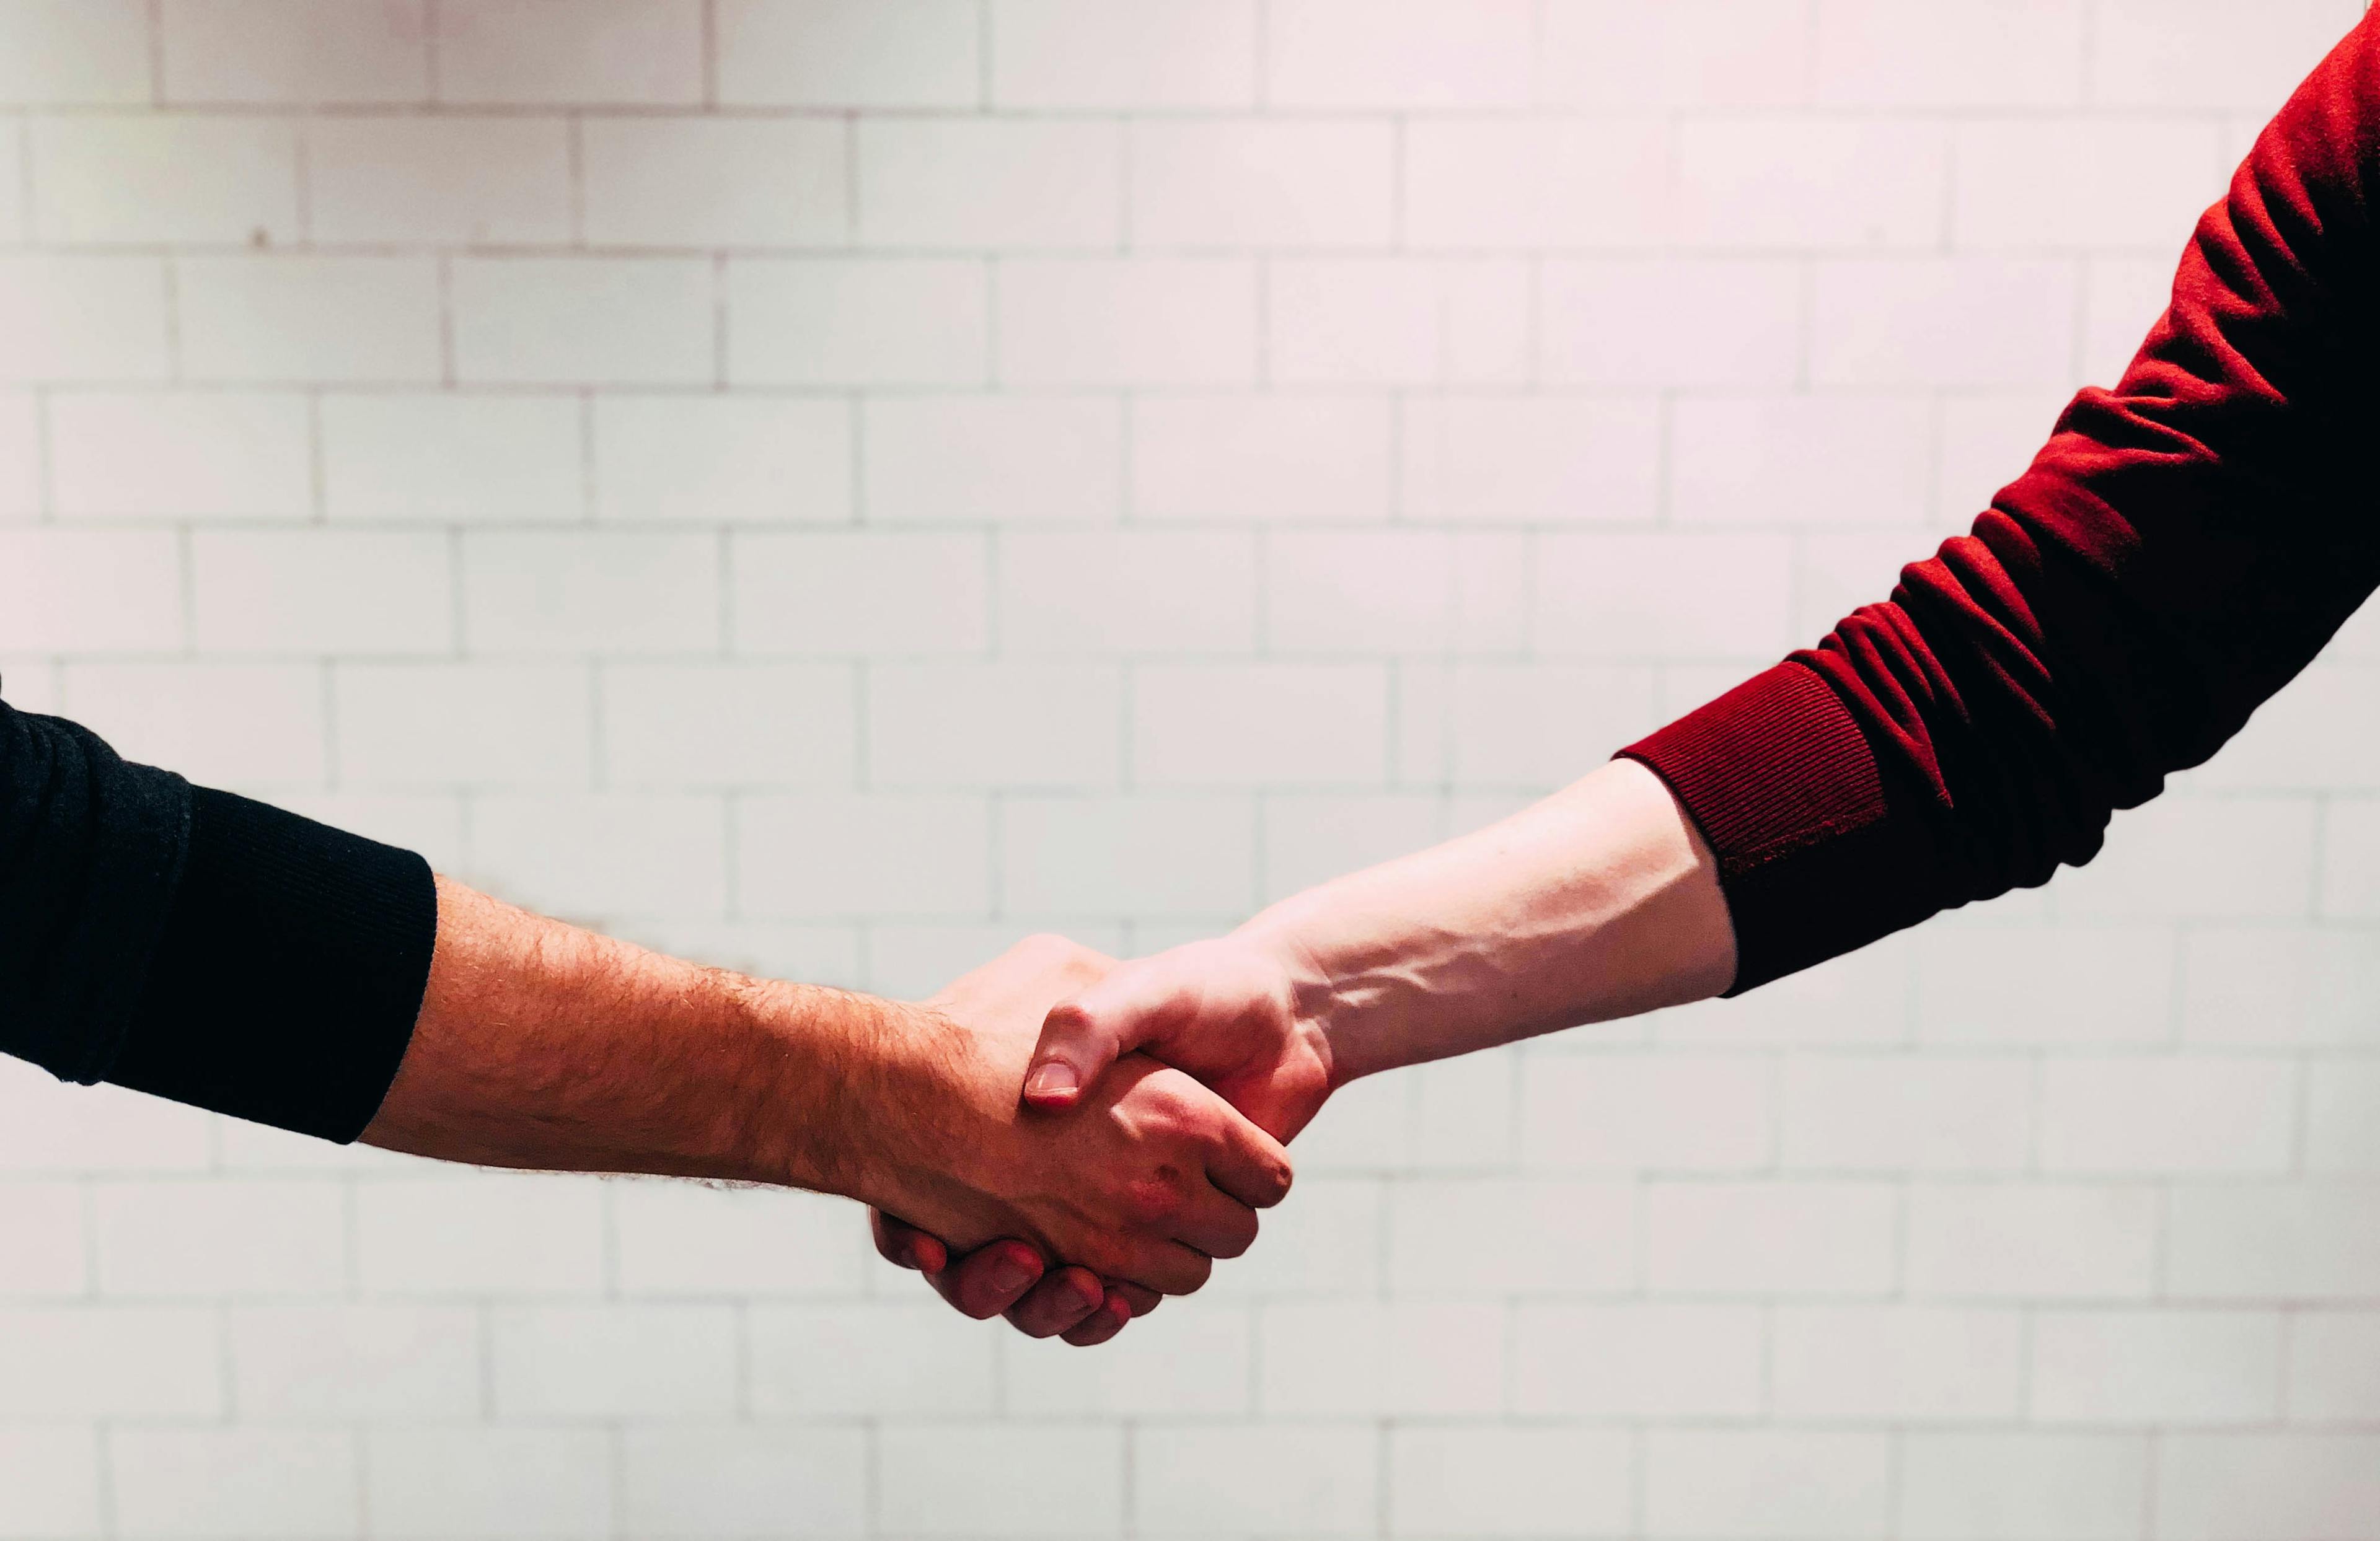 8 Key Ways for Building Strong Client Relationships in 2022